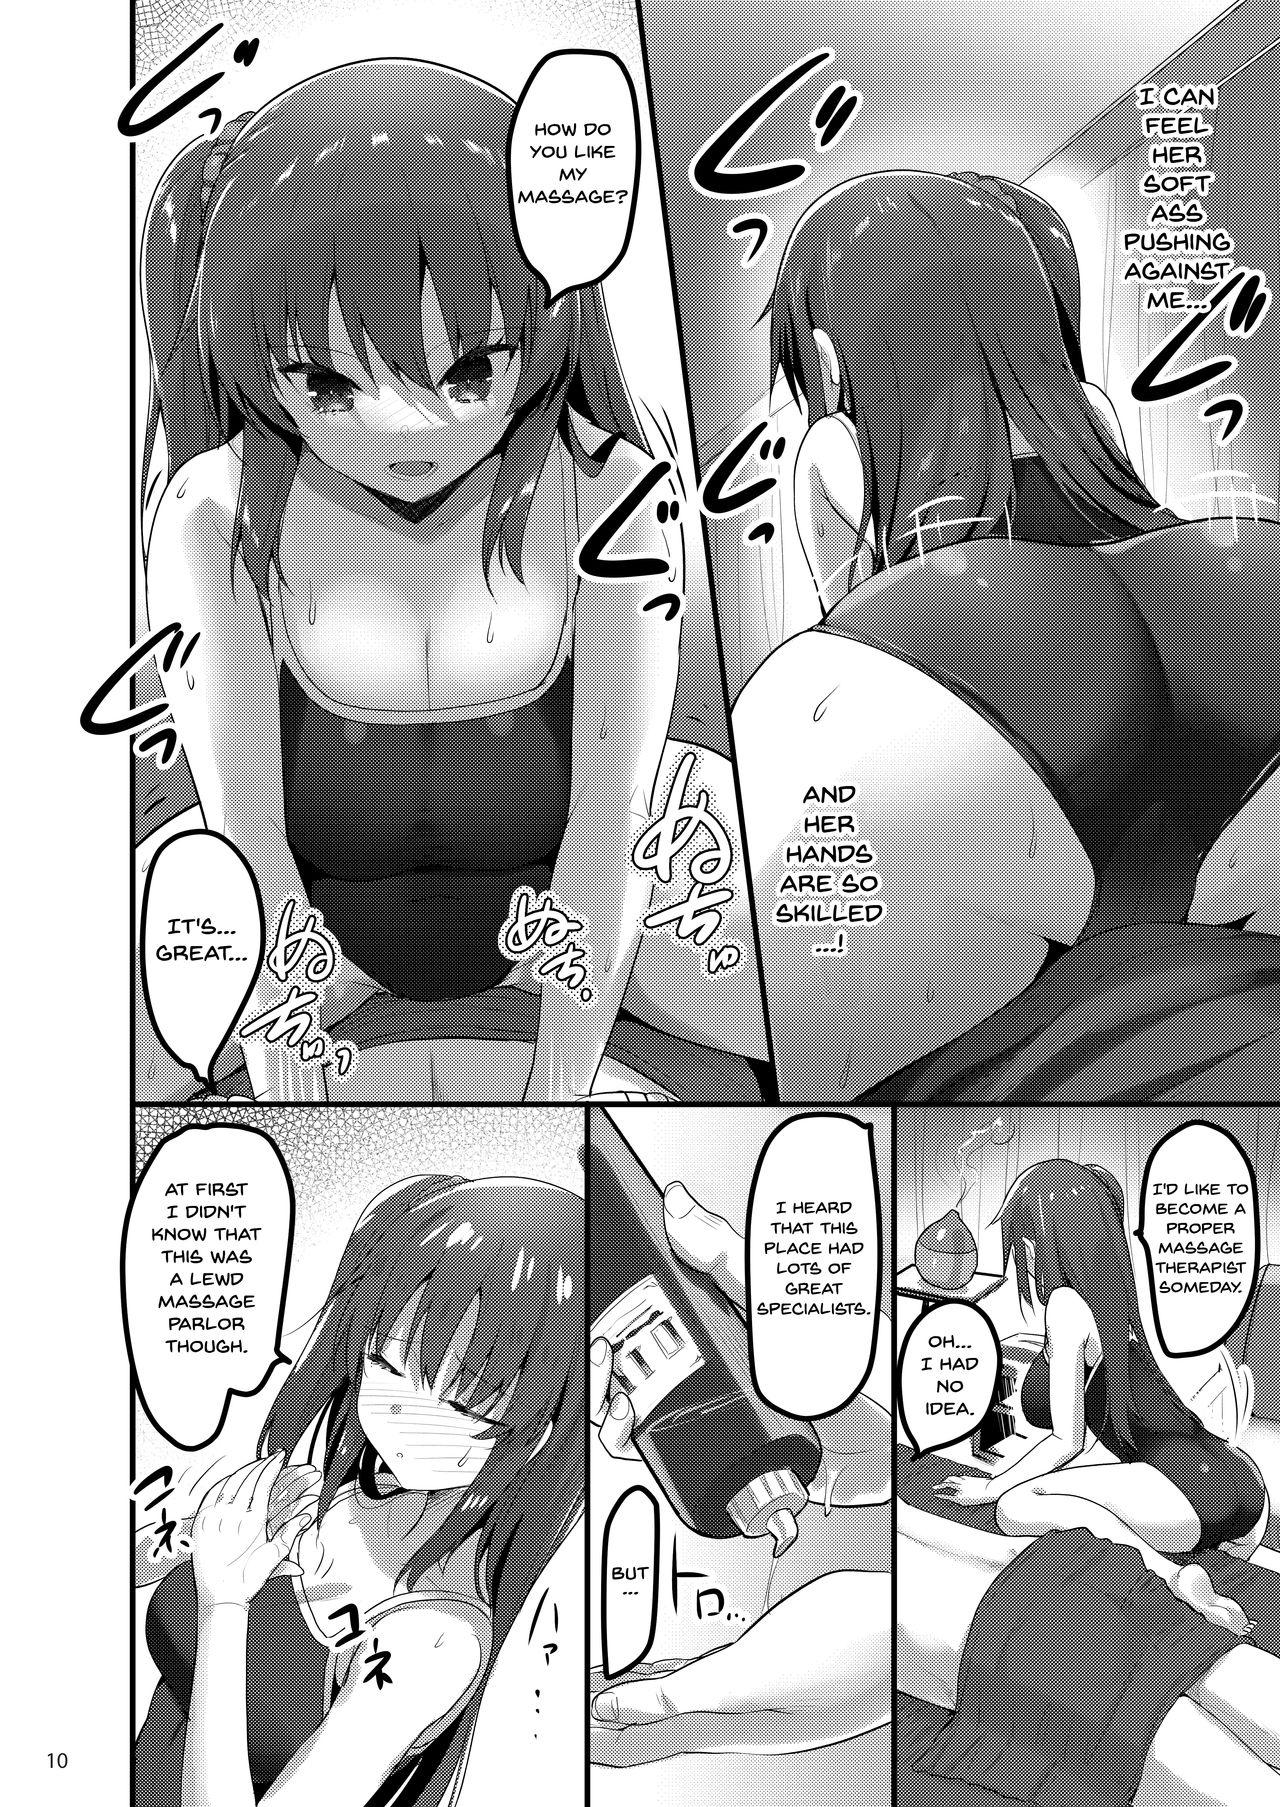 Lolicon Ecchi na Massage-ya ni Kitara Classmate ga Dete Kita Hanashi | A Story Of Going Out To Get a Massage And The One Who Shows Up Is My Classmate - Original Massage Sex - Page 9